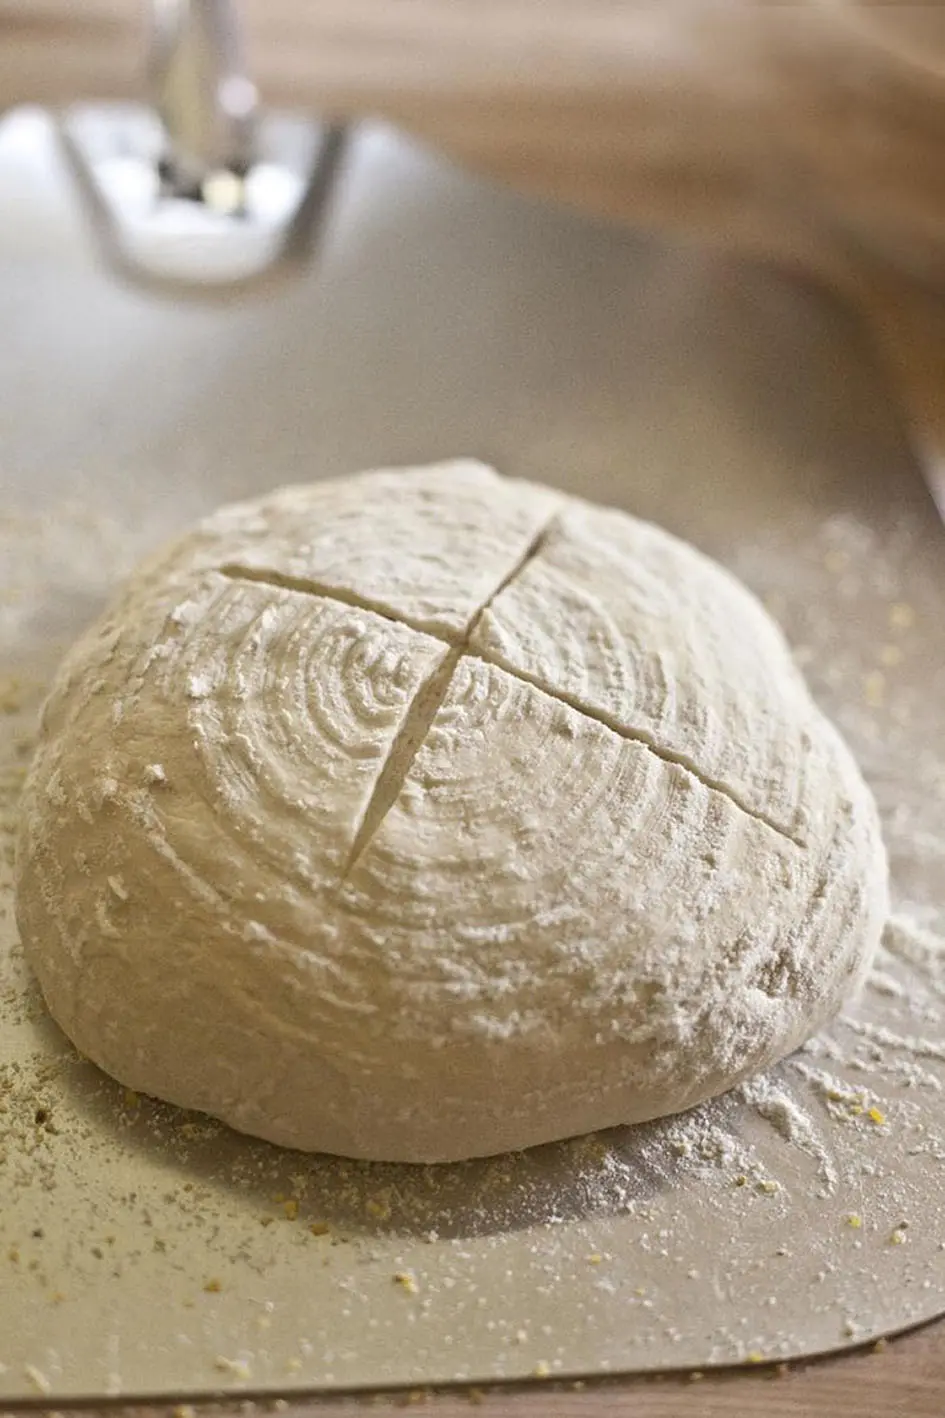 A dough ball made from Glod Medal Flour on a counter top, ready to be shaped and baked.